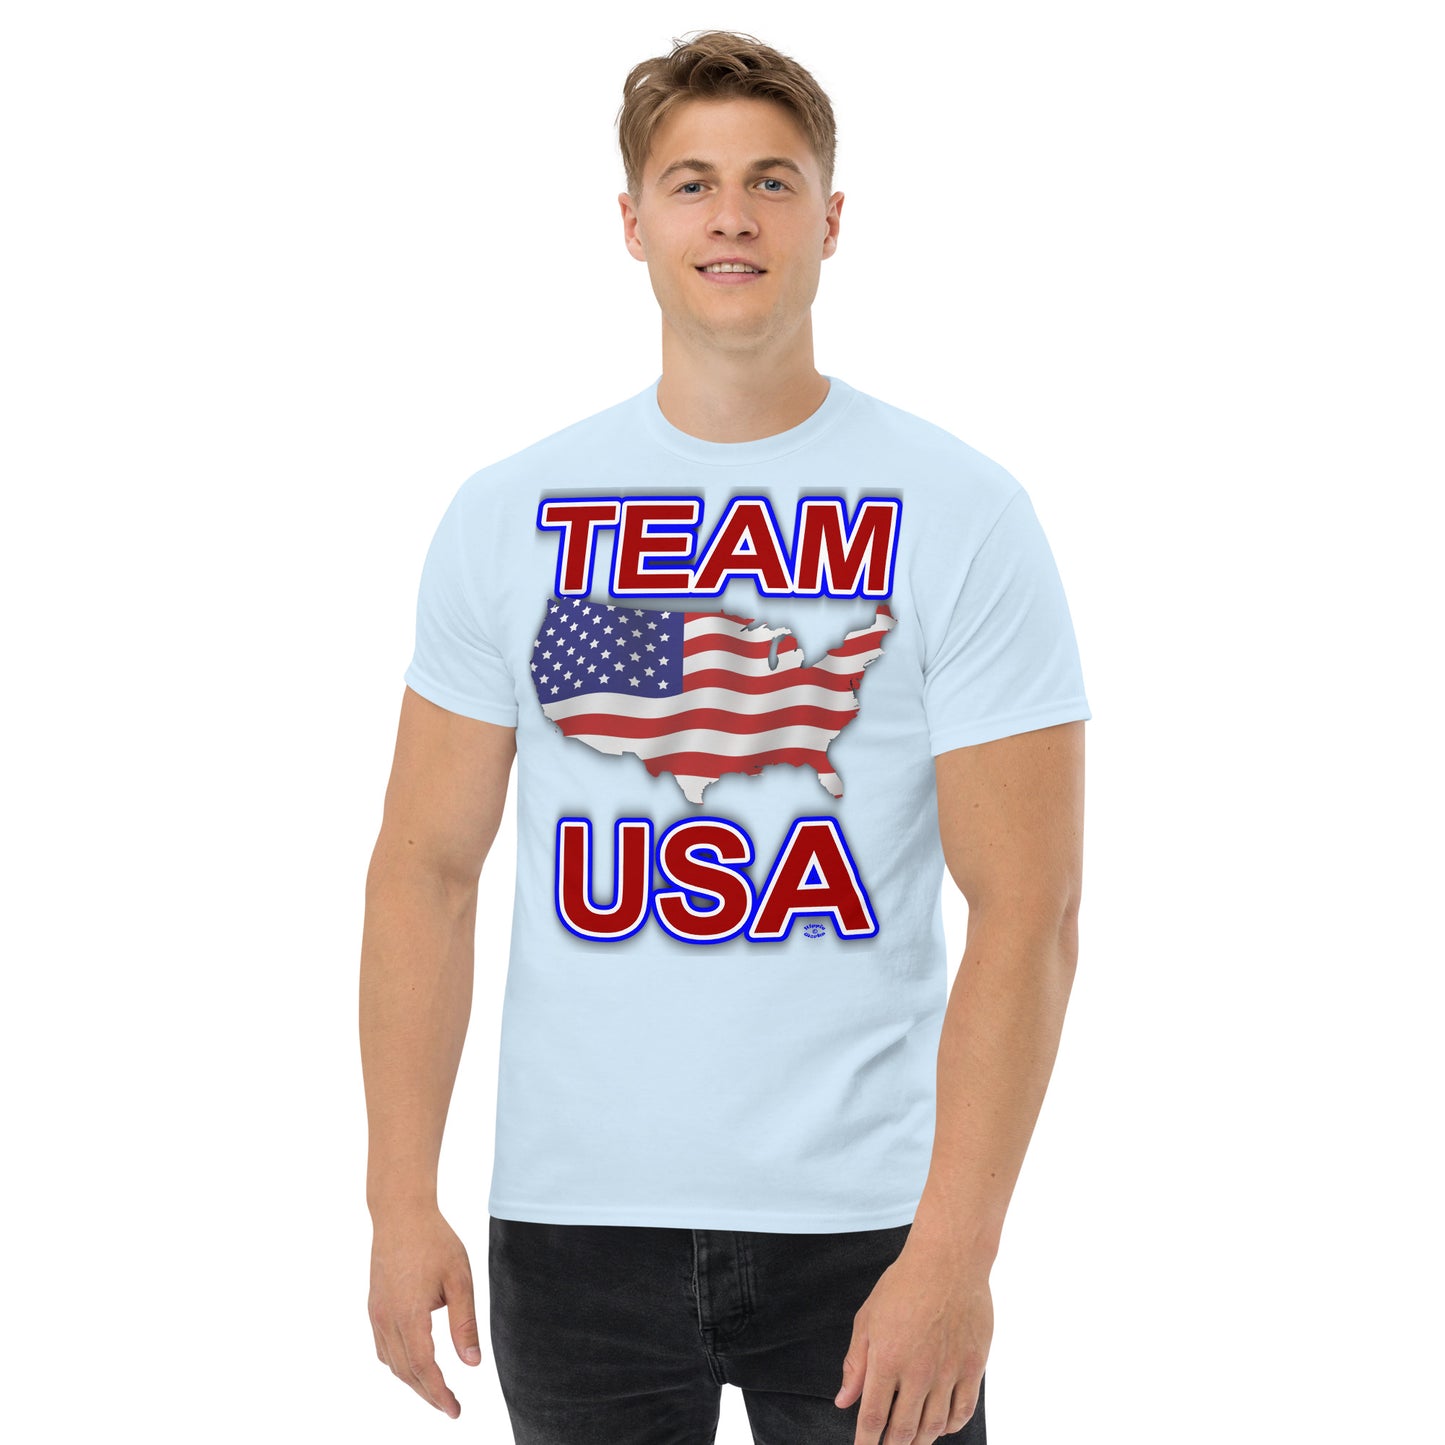 A Picture of a man wearing a tshirt with an american flag usa map with team USA written in red, white and blue - ft - light blue